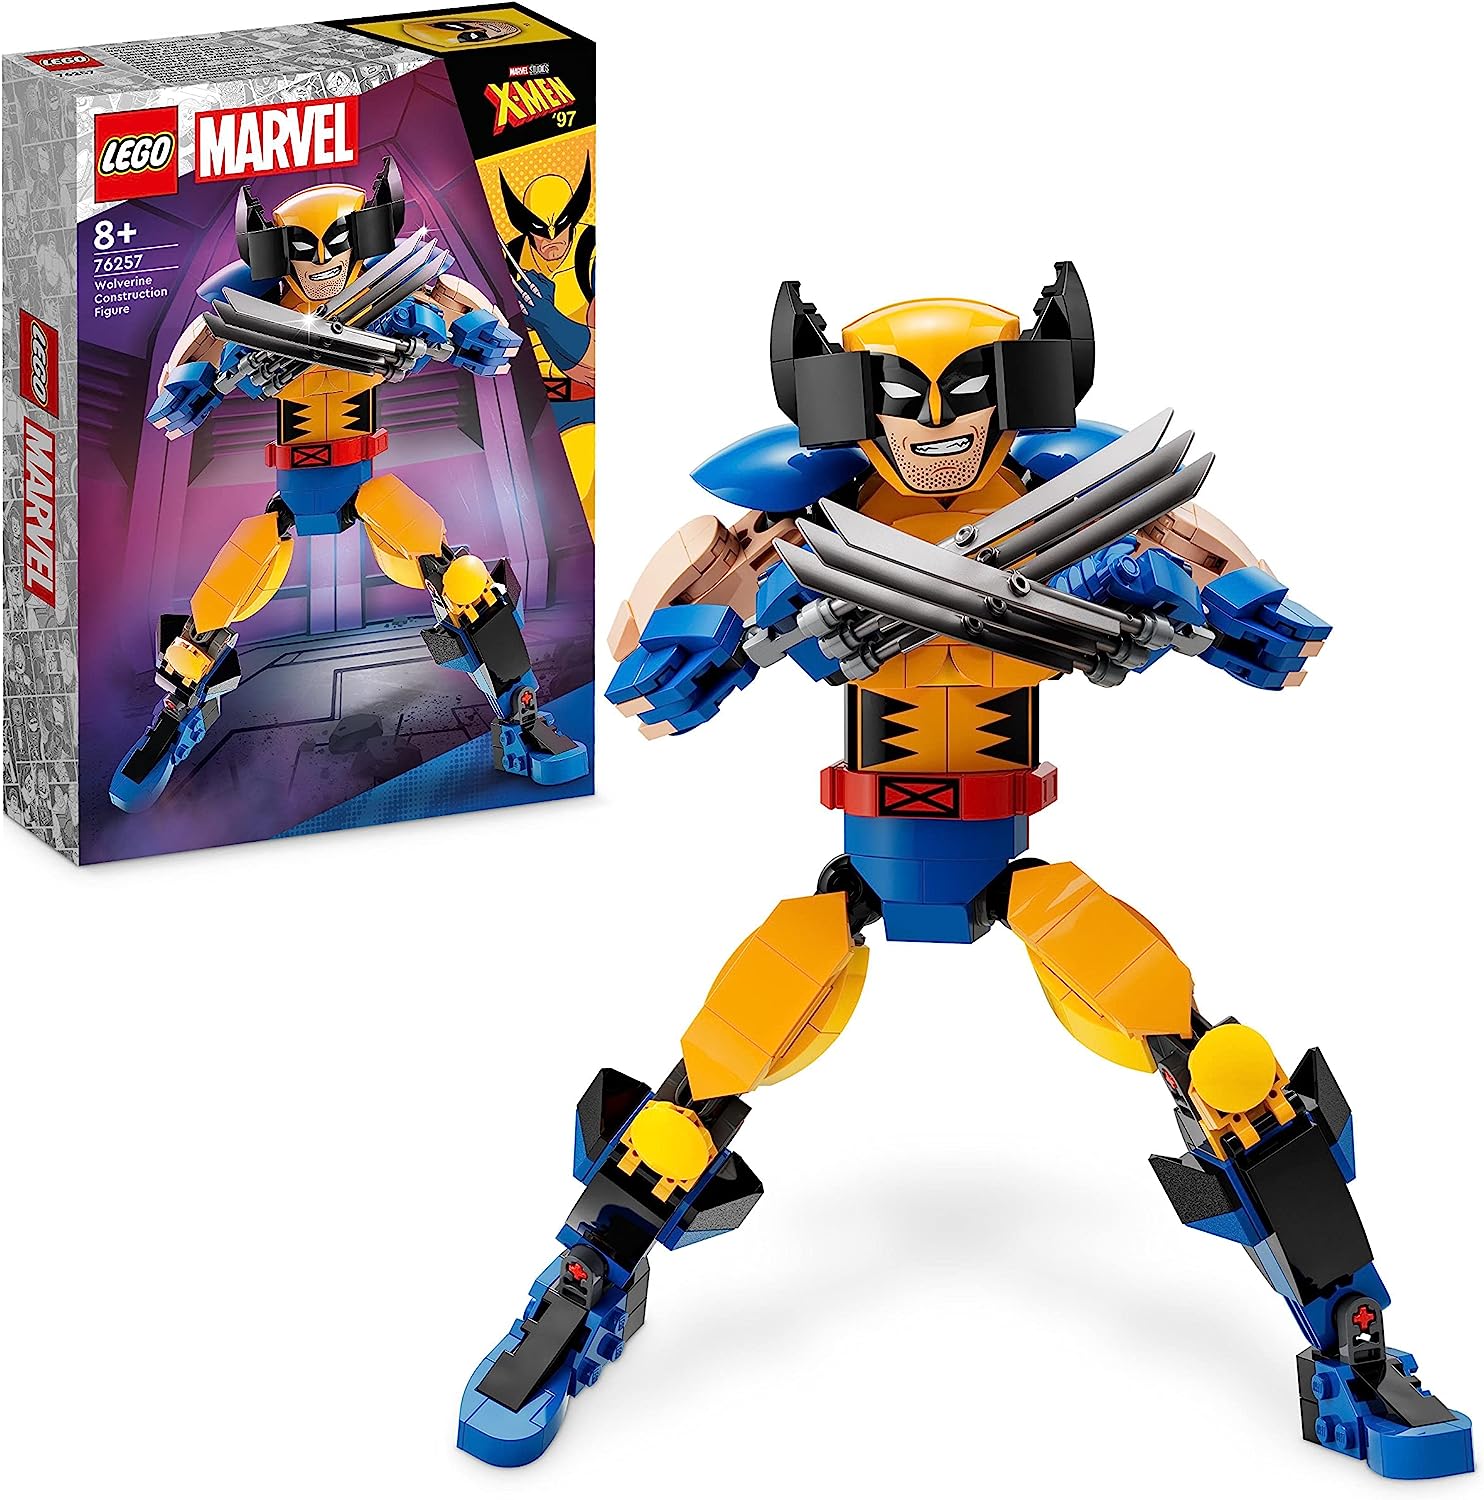 LEGO 76257 Marvel Wolverine Building Figure, Superhero Action Figure With Claws from X-Men, Toy and Collectable for Children, Boys and Girls from 8 Years